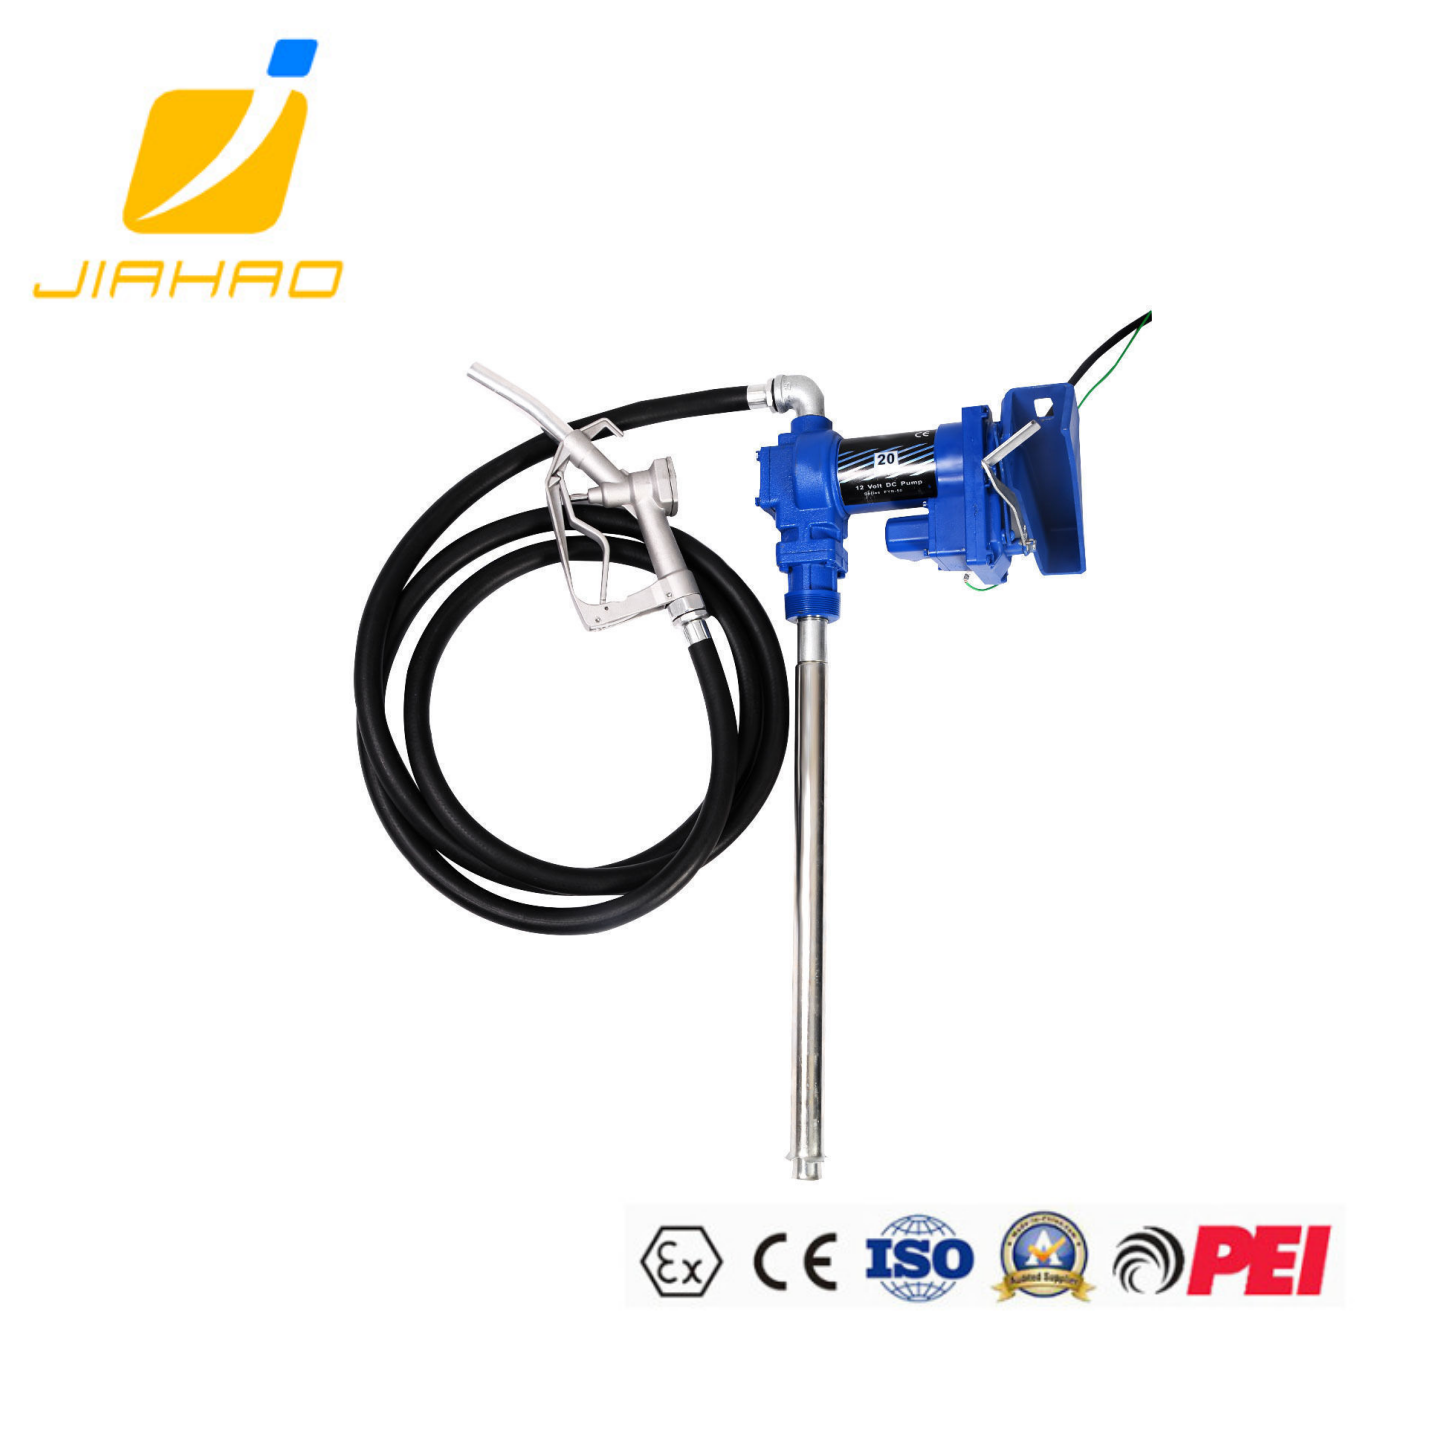 EX-PROOF ELECTRIC GASOLINE PETROL TRANSFER PUMP KIT WITH MECHANICAL FLOW METER